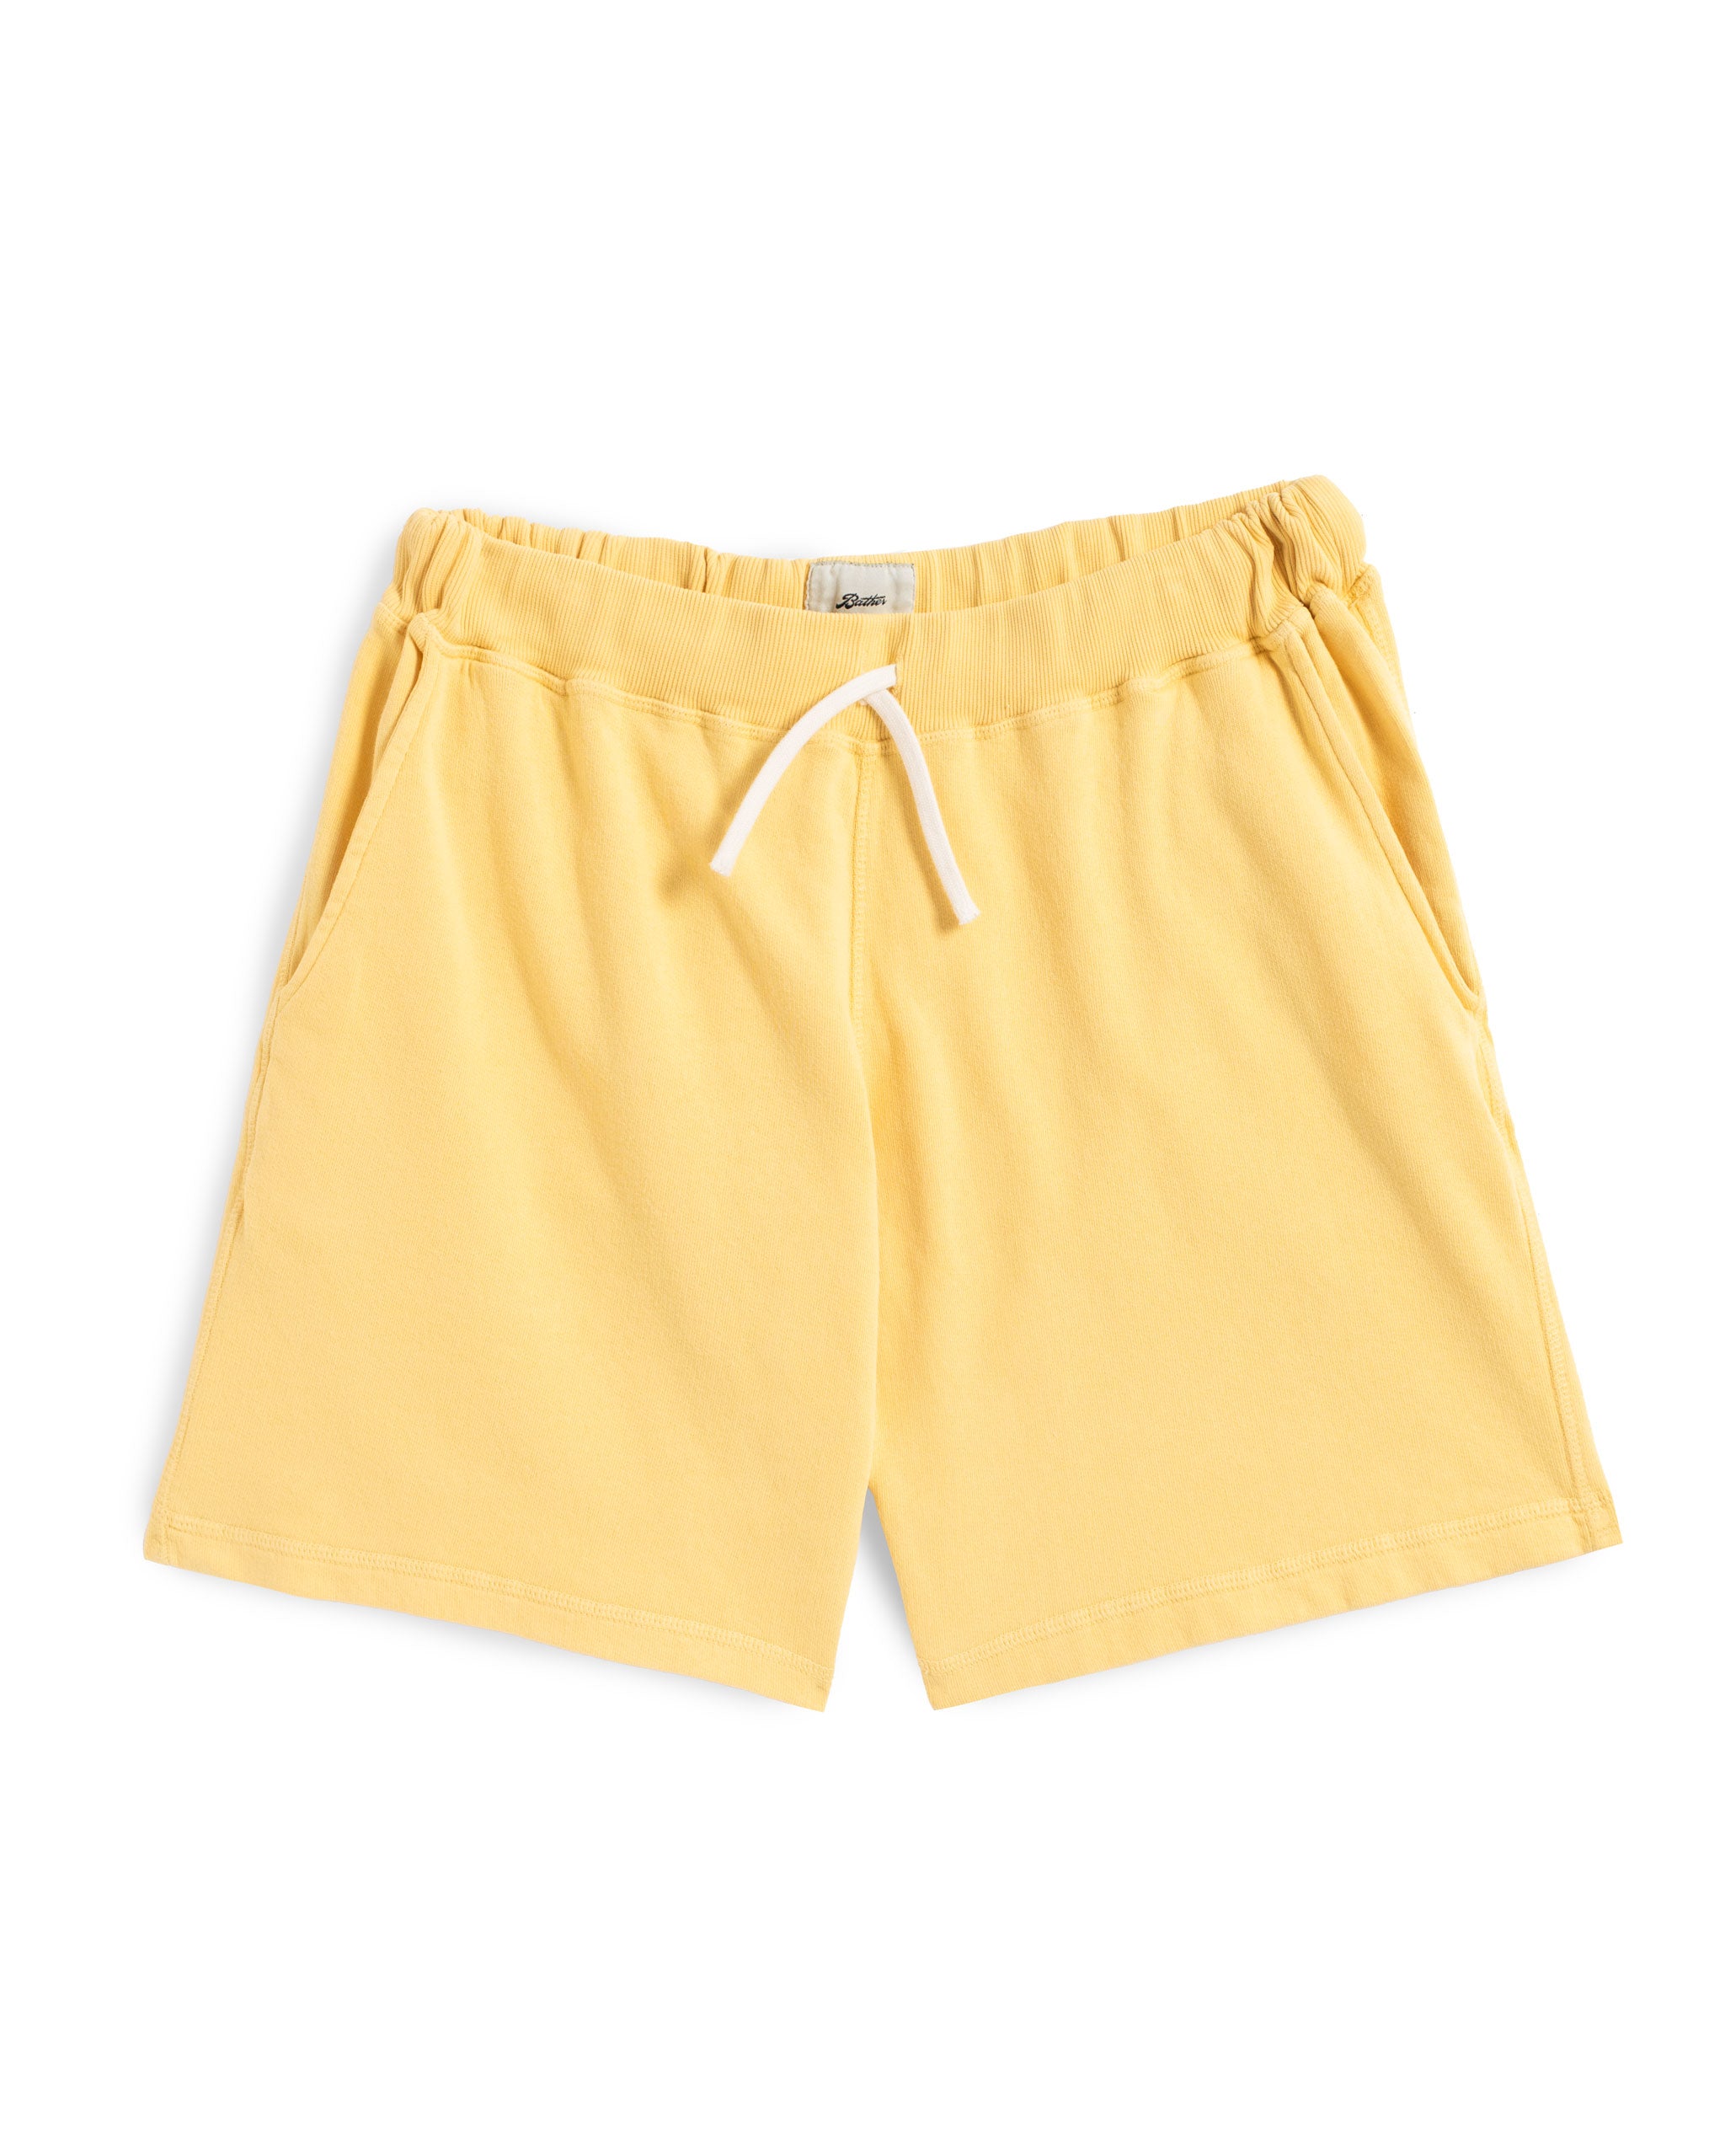 Canary yellow french terry sweat shorts